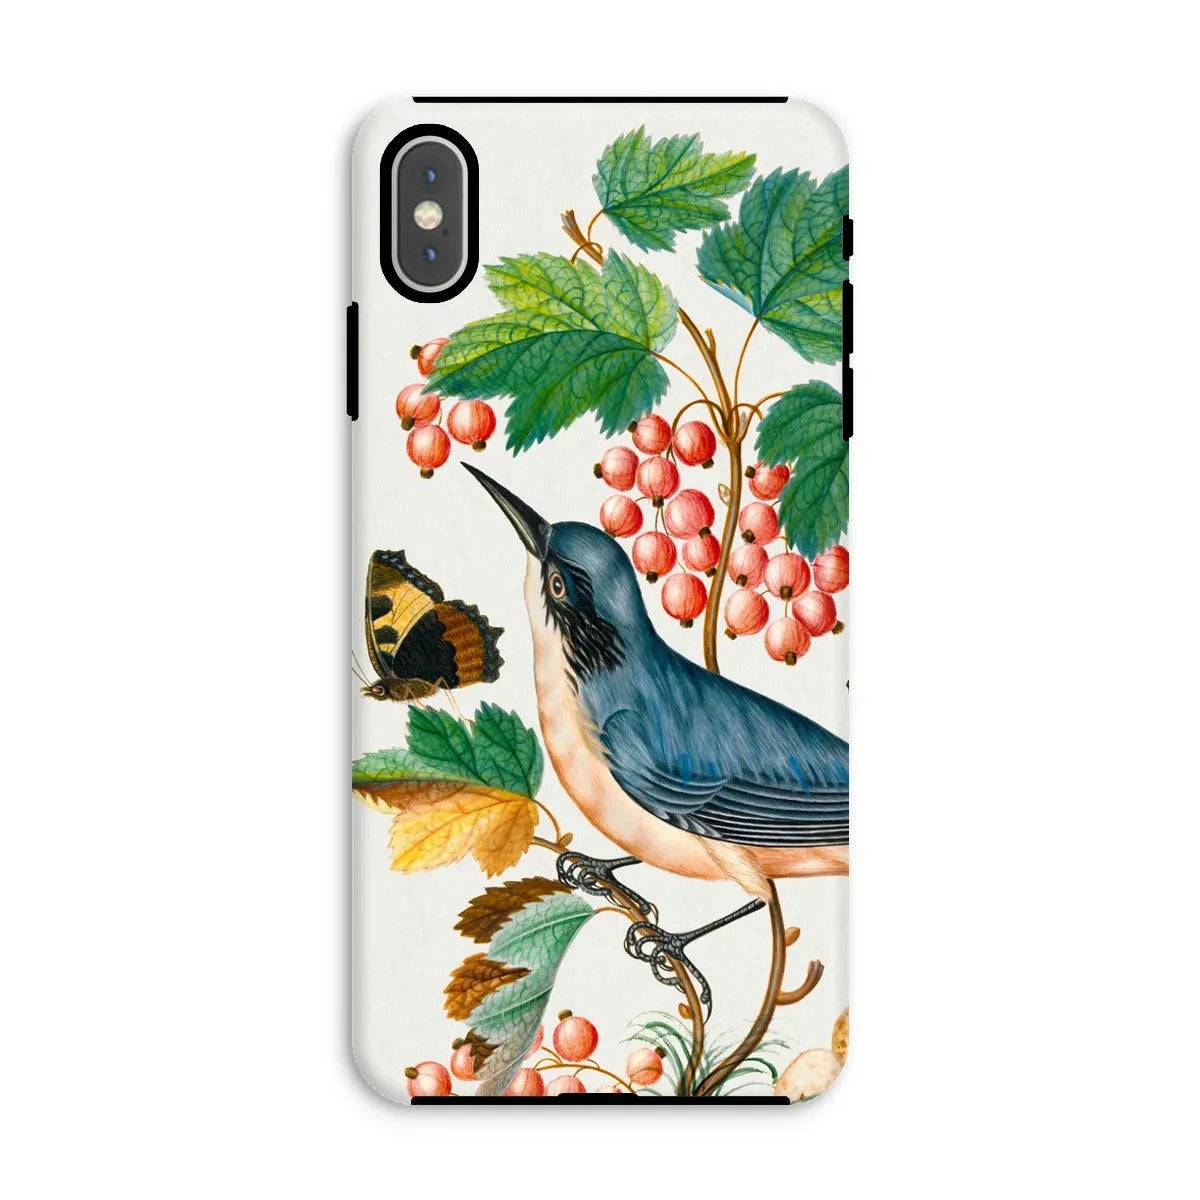 Warbler Admiral Wasps & Ants - Art Phone Case - James Bolton - Iphone Xs Max / Matte - Mobile Phone Cases - Aesthetic